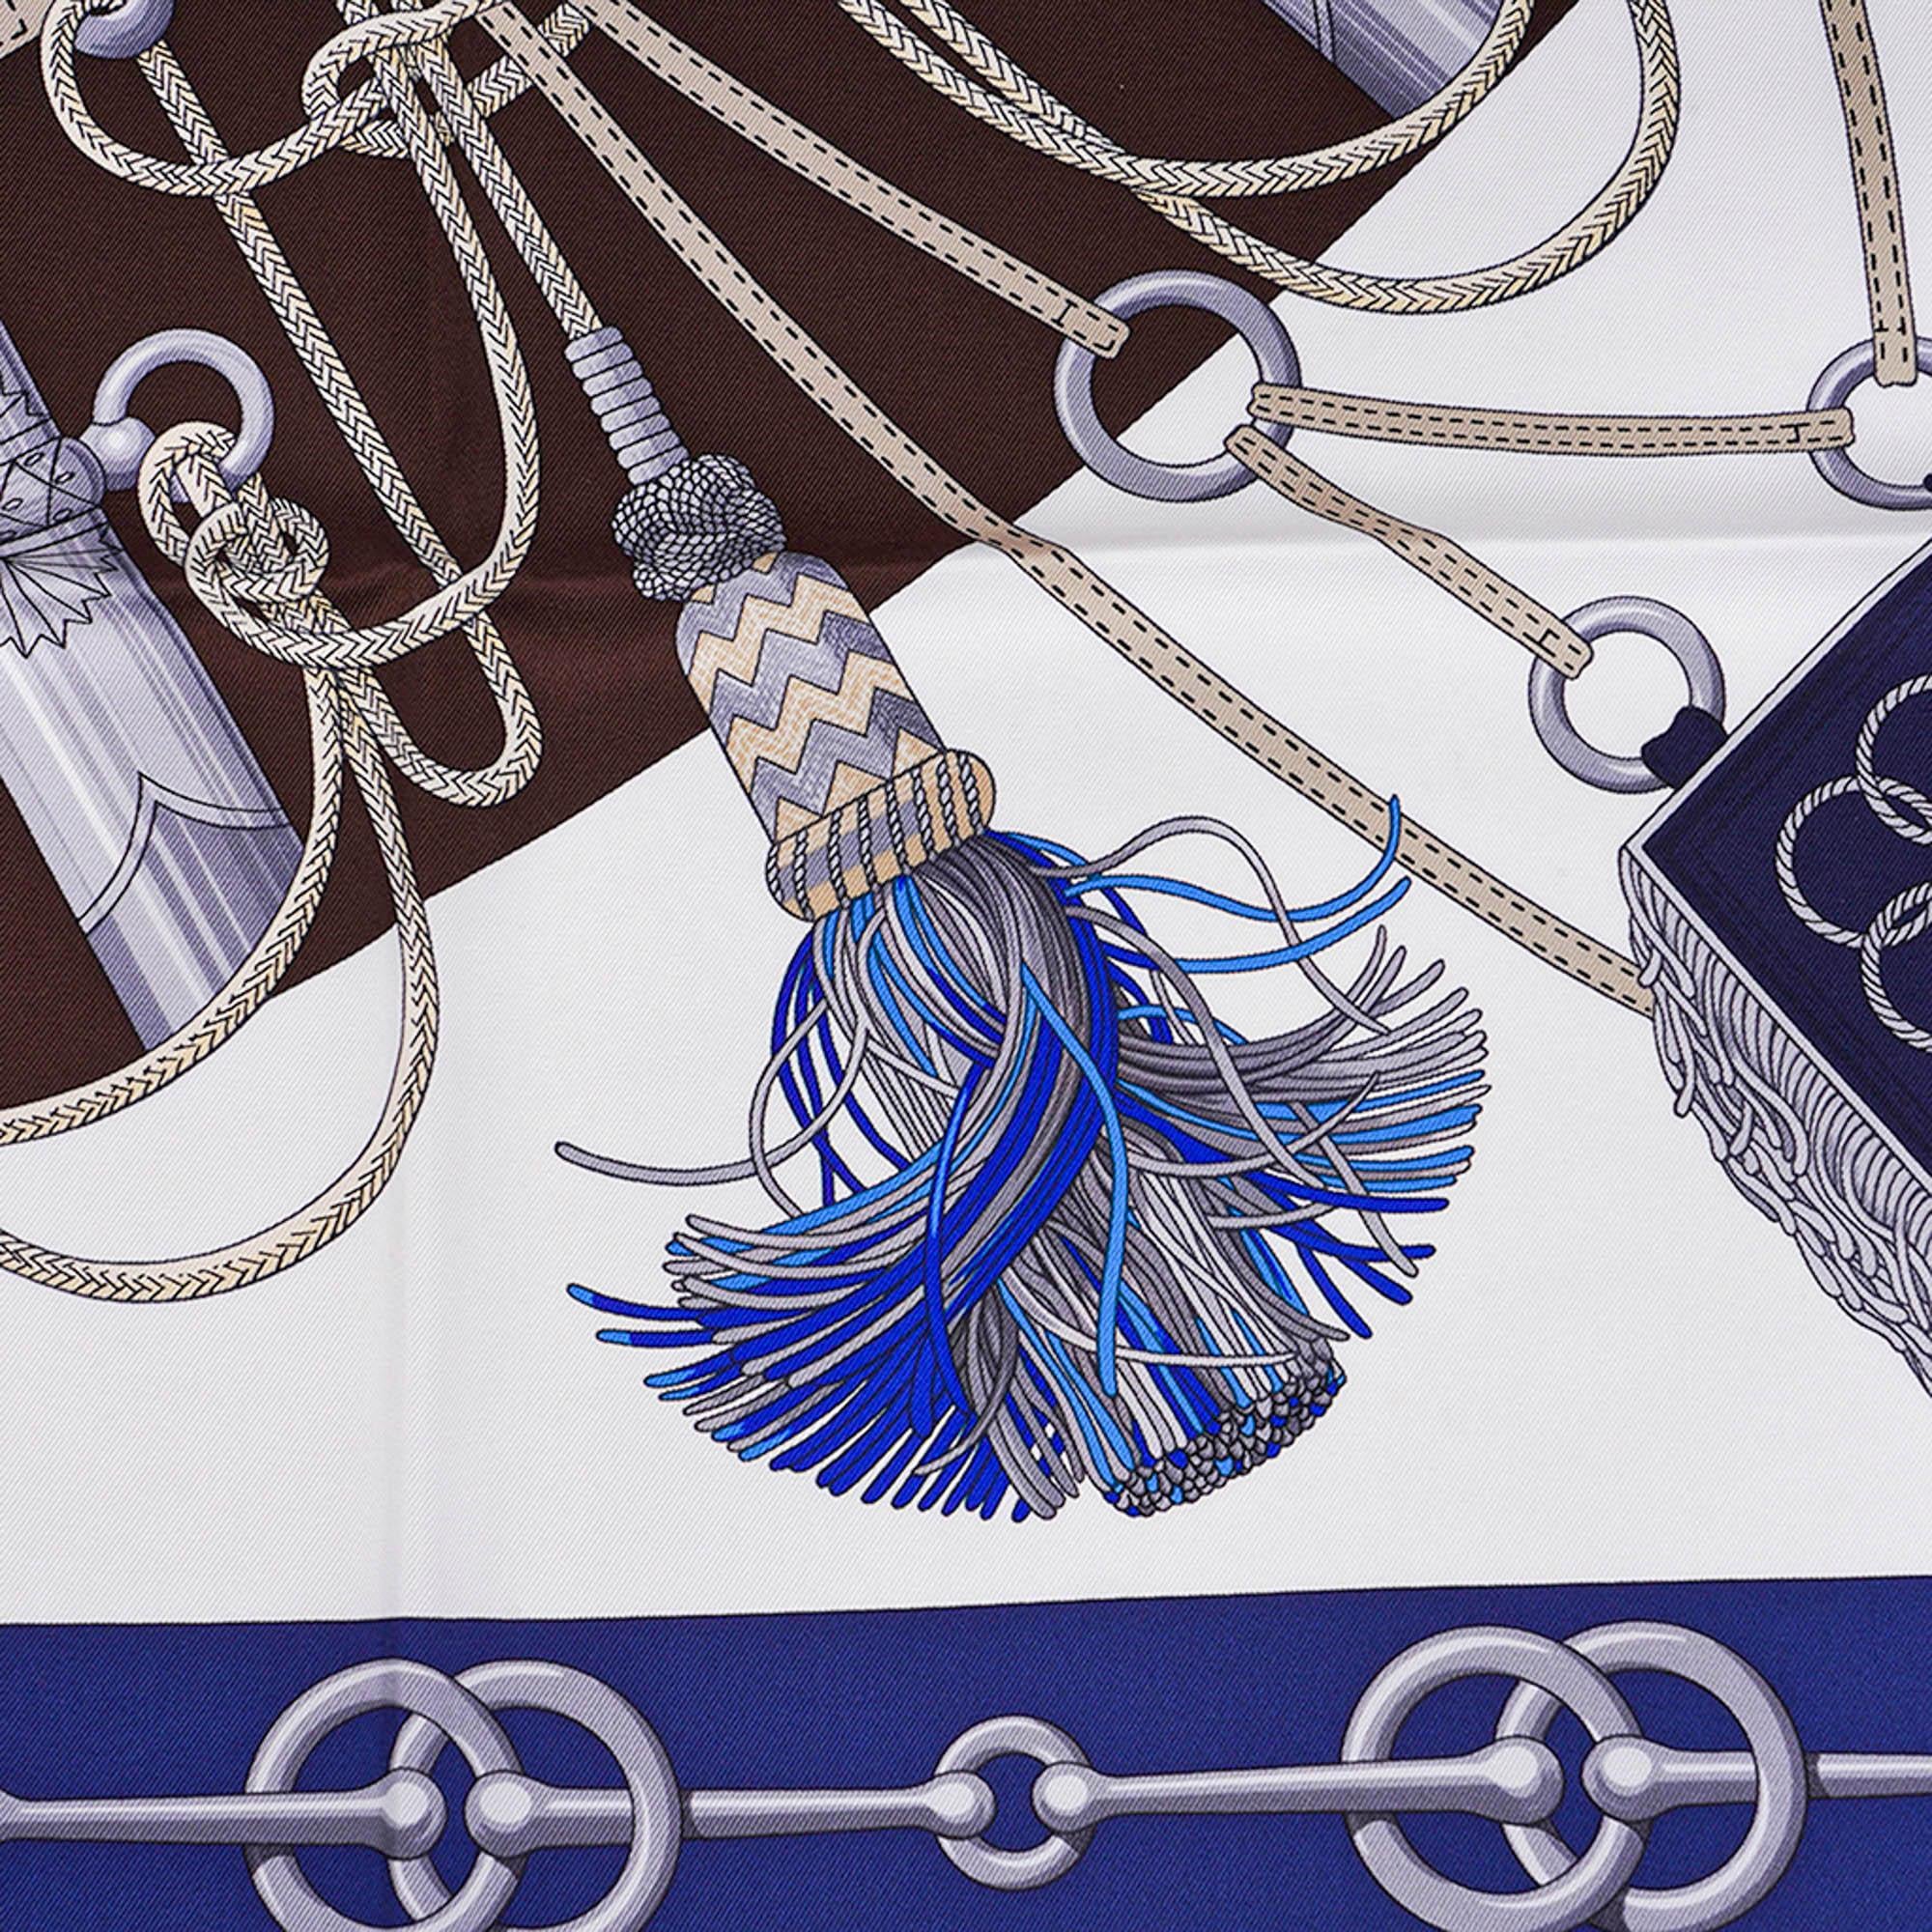 Mightychic offers an Hermes Cliquetis silk twill scarf.
Featured in Blanc, Marine and Ebene colorway.
Designed by Julie Abadie, the scarf is inspired antique pieces in the Emile Hermes collection.
The fan shaped composition was released in 1972 and